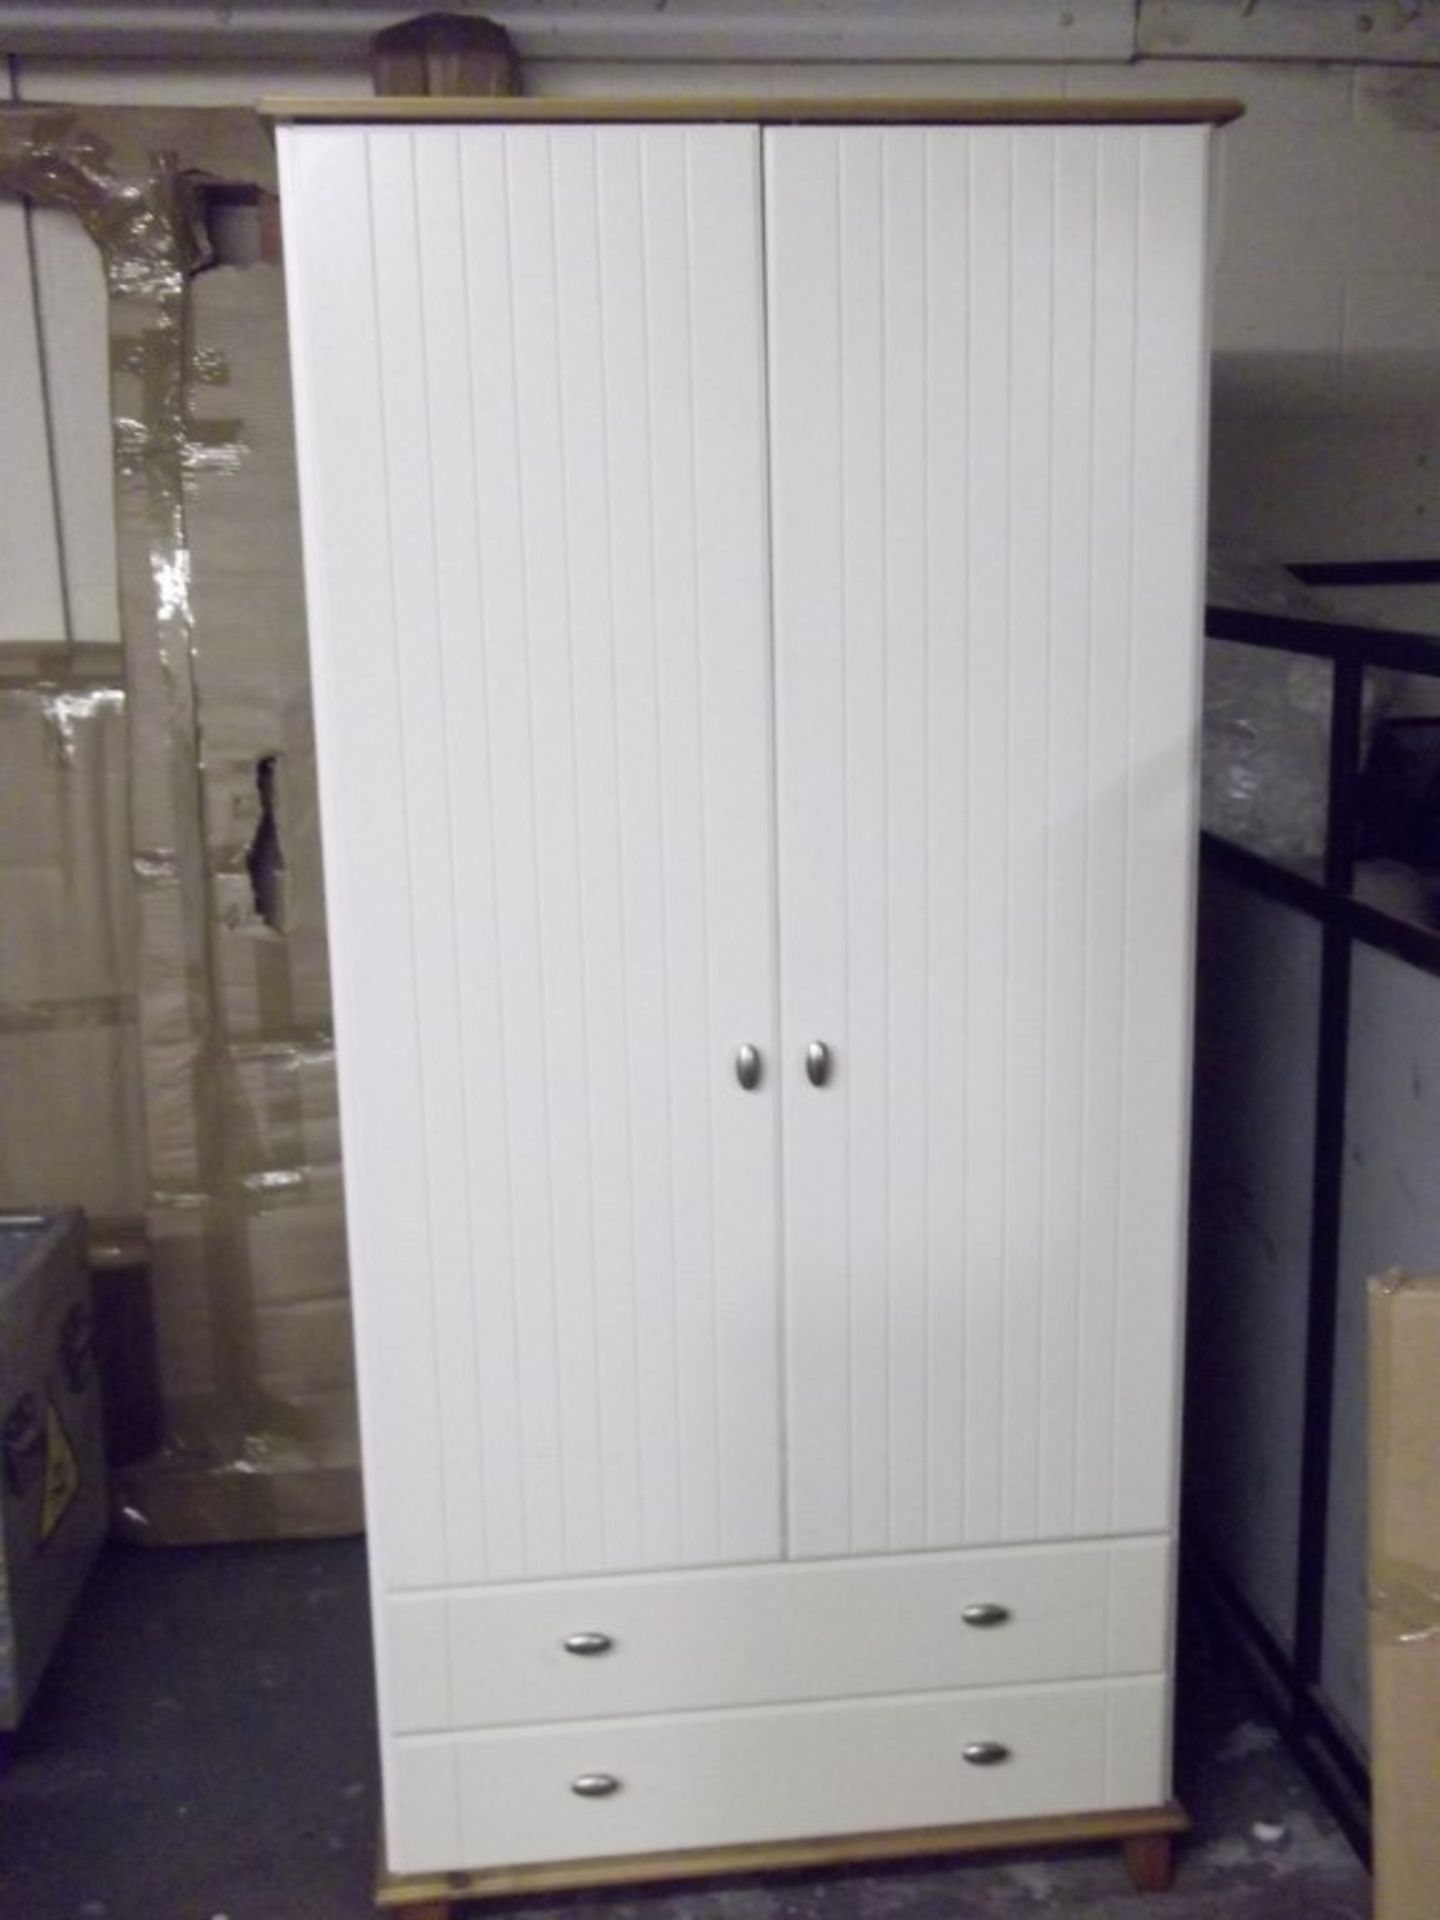 1 x Large Cream Wardrobe - 2 Door,/ 2 Drawer - Pre-Built - Pre-owned, In Good Condition - H181 x W81 - Image 5 of 7